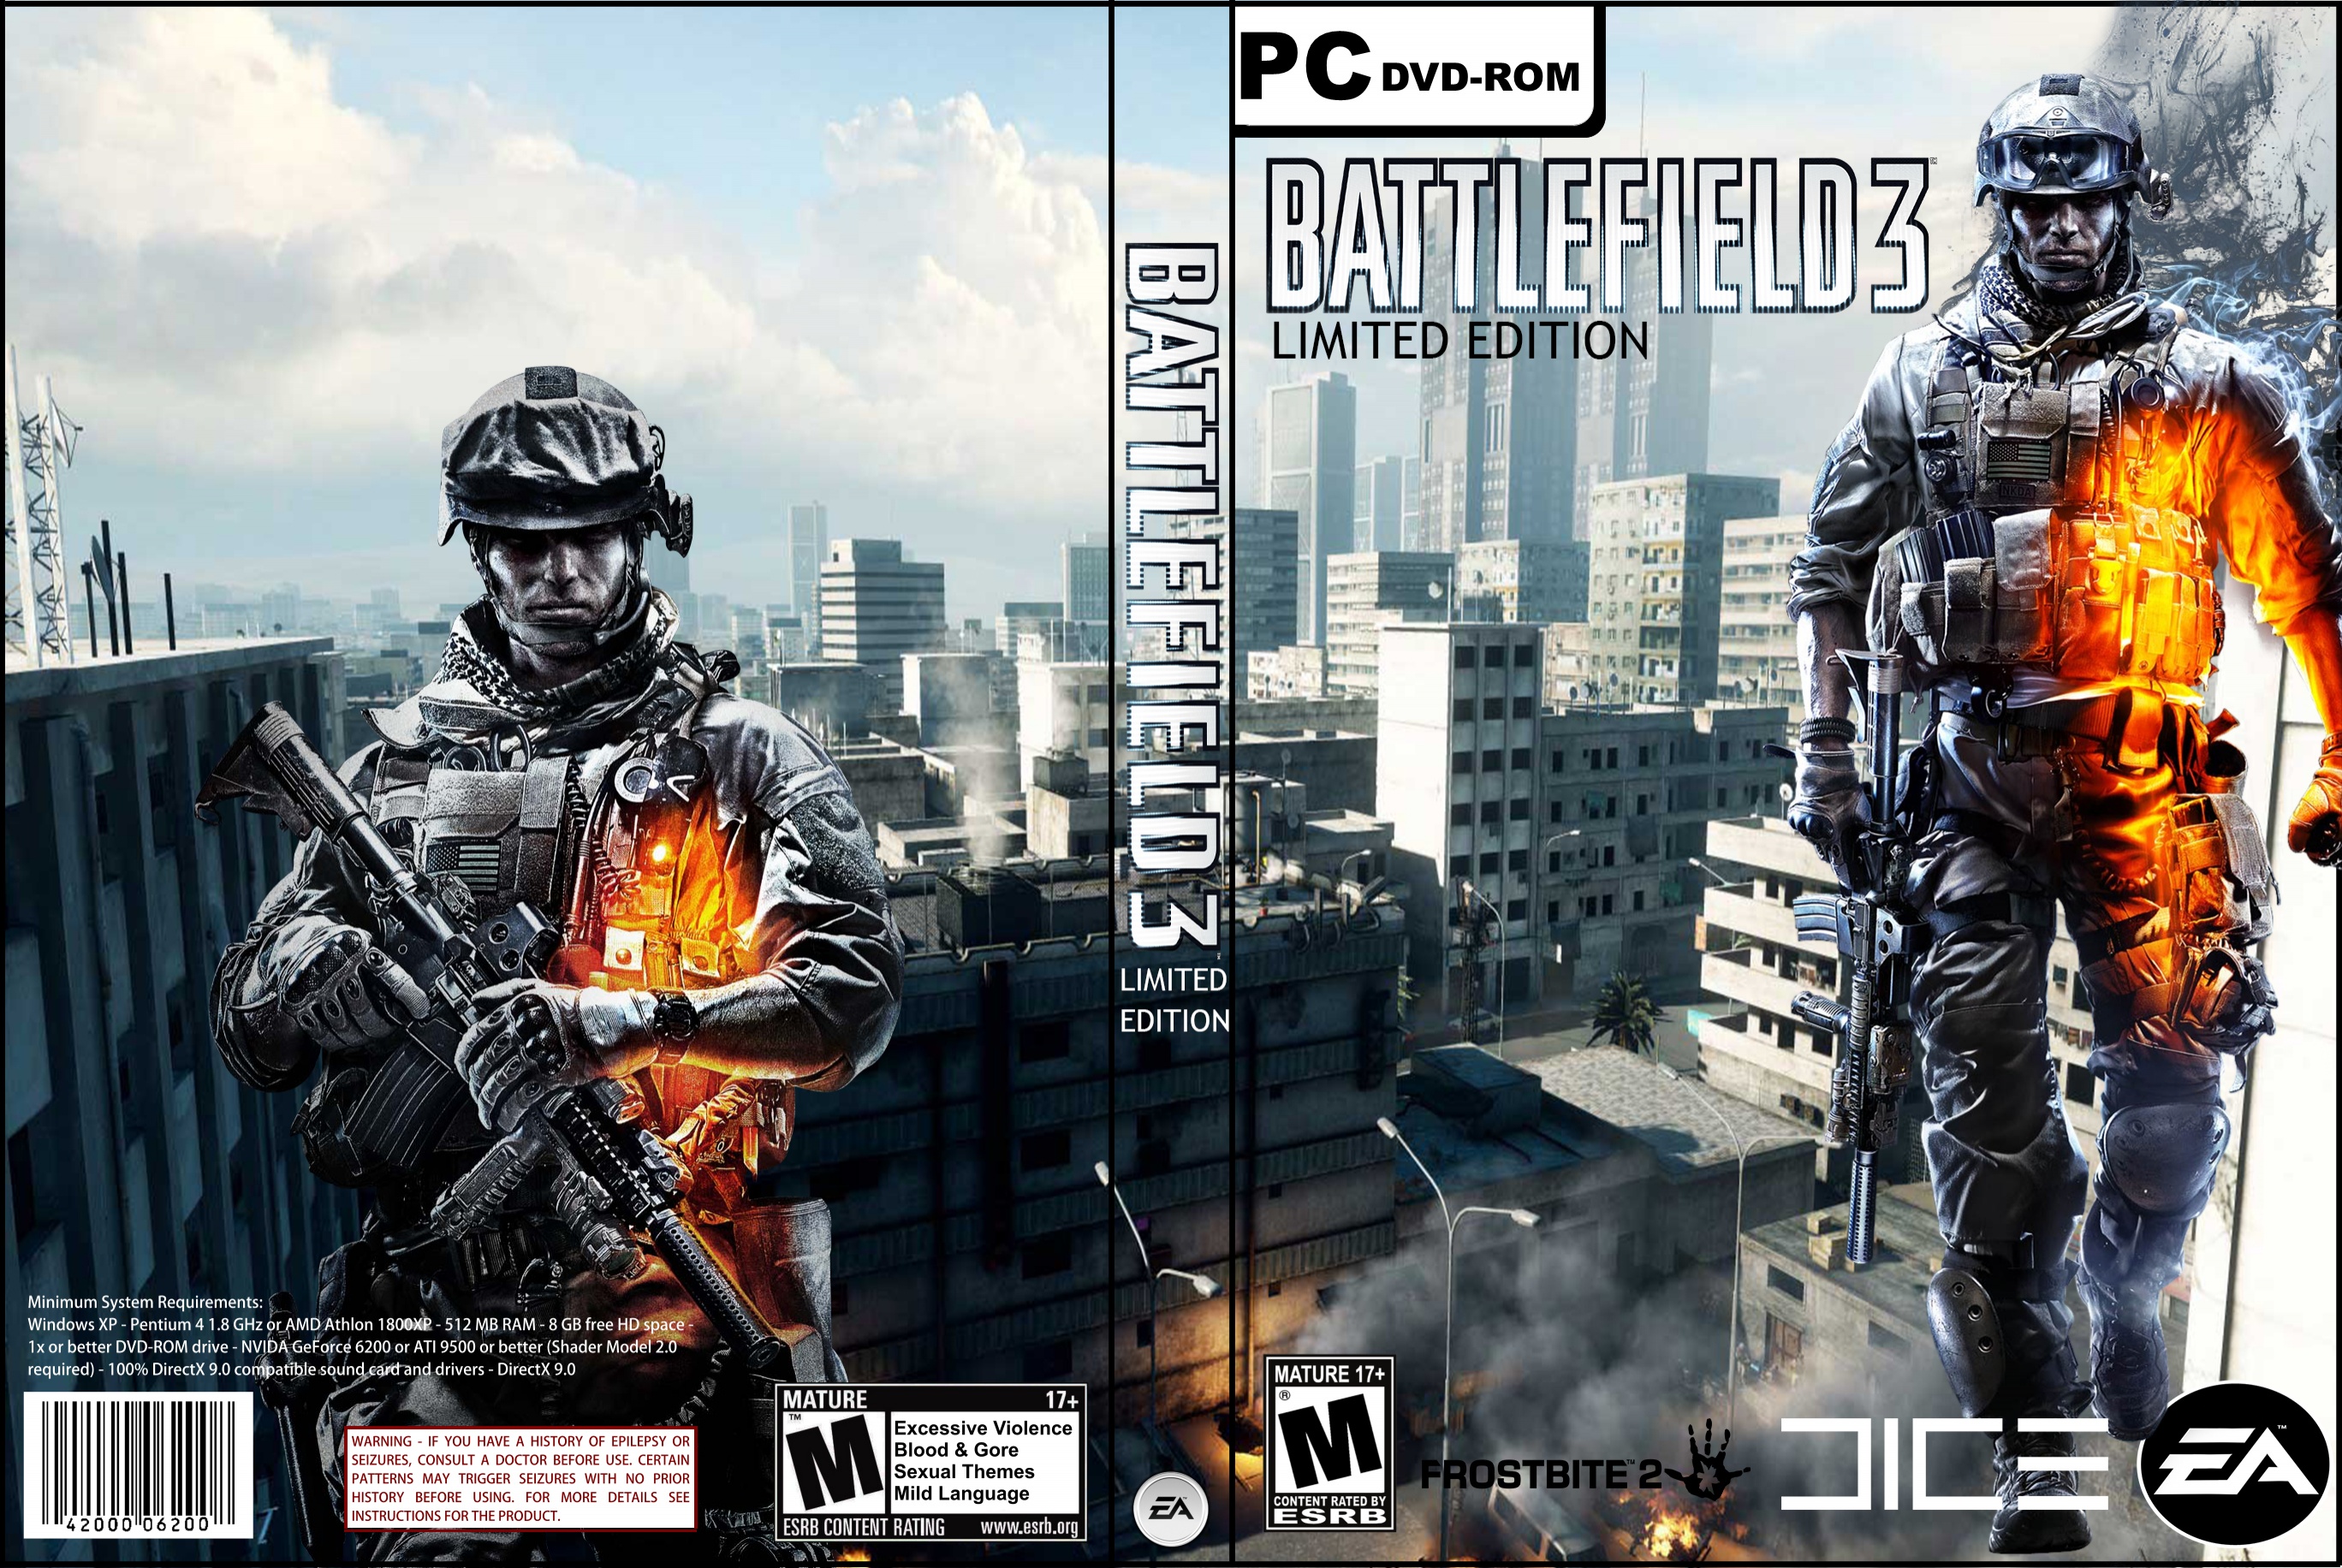 Battlefield 3 "Limited Edition" box cover